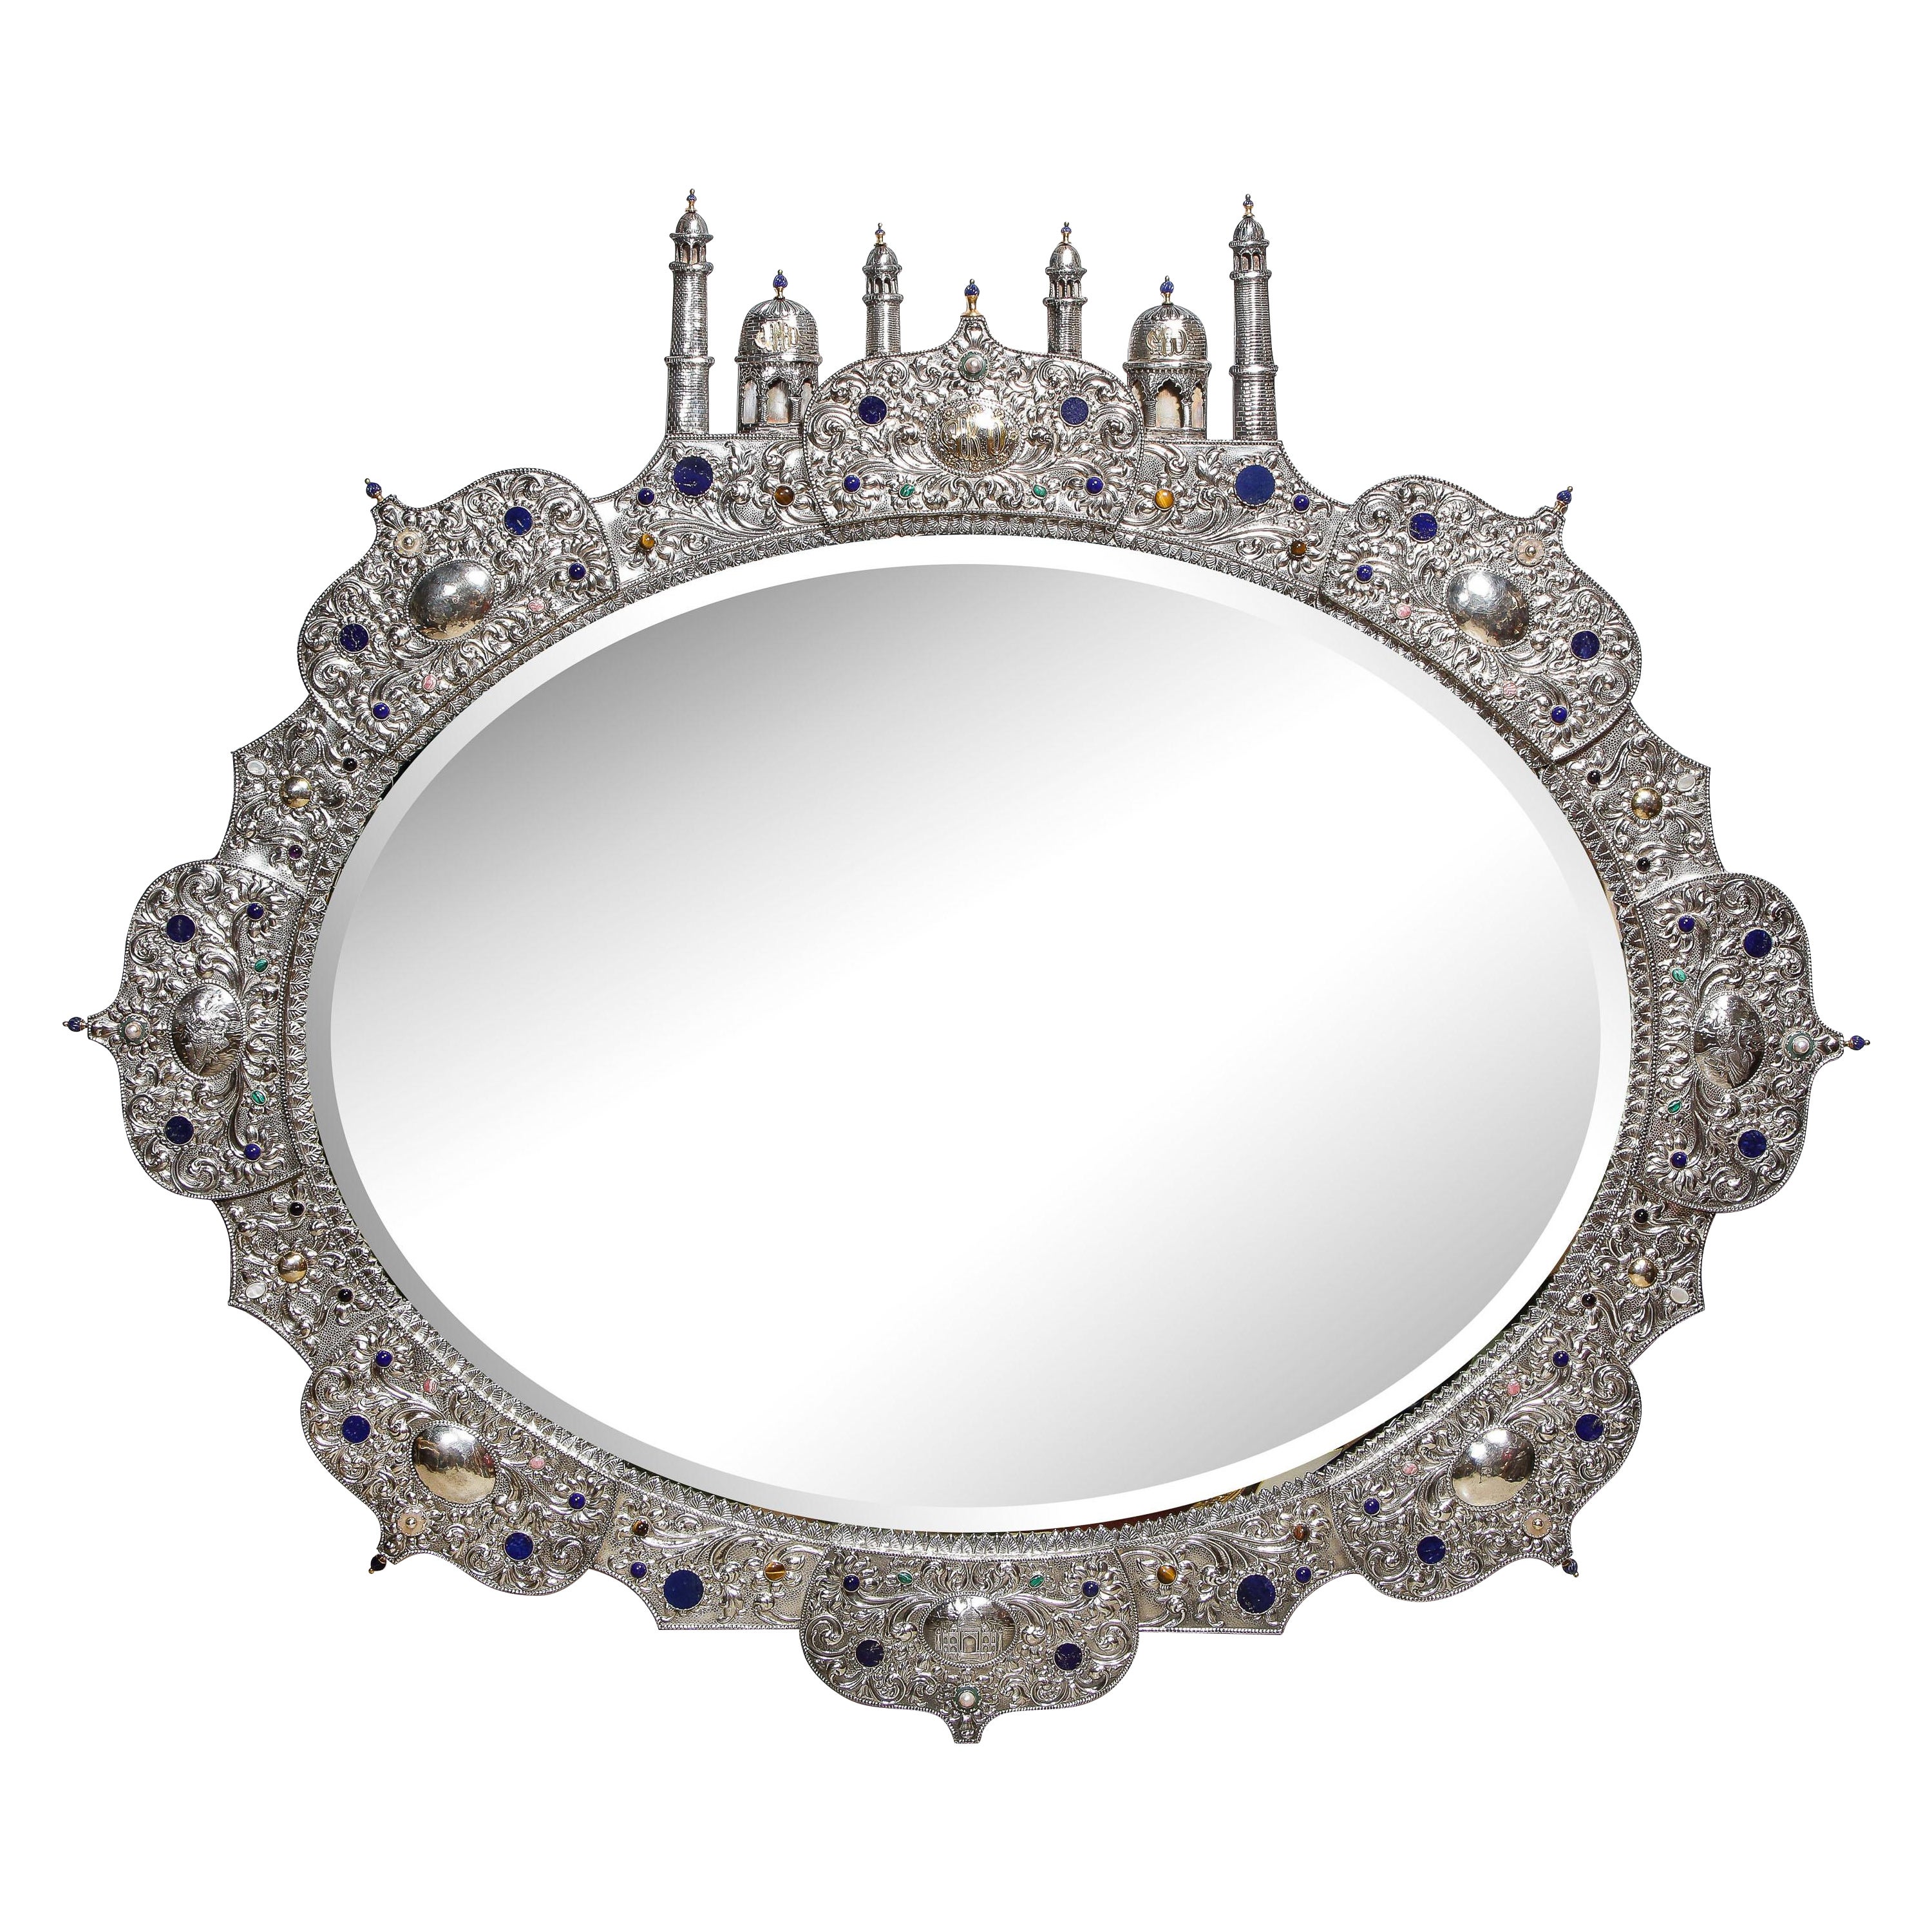 Rare and Magnificent Thai Silver, Gold & Jeweled Palace Mirror for Indian Palace For Sale